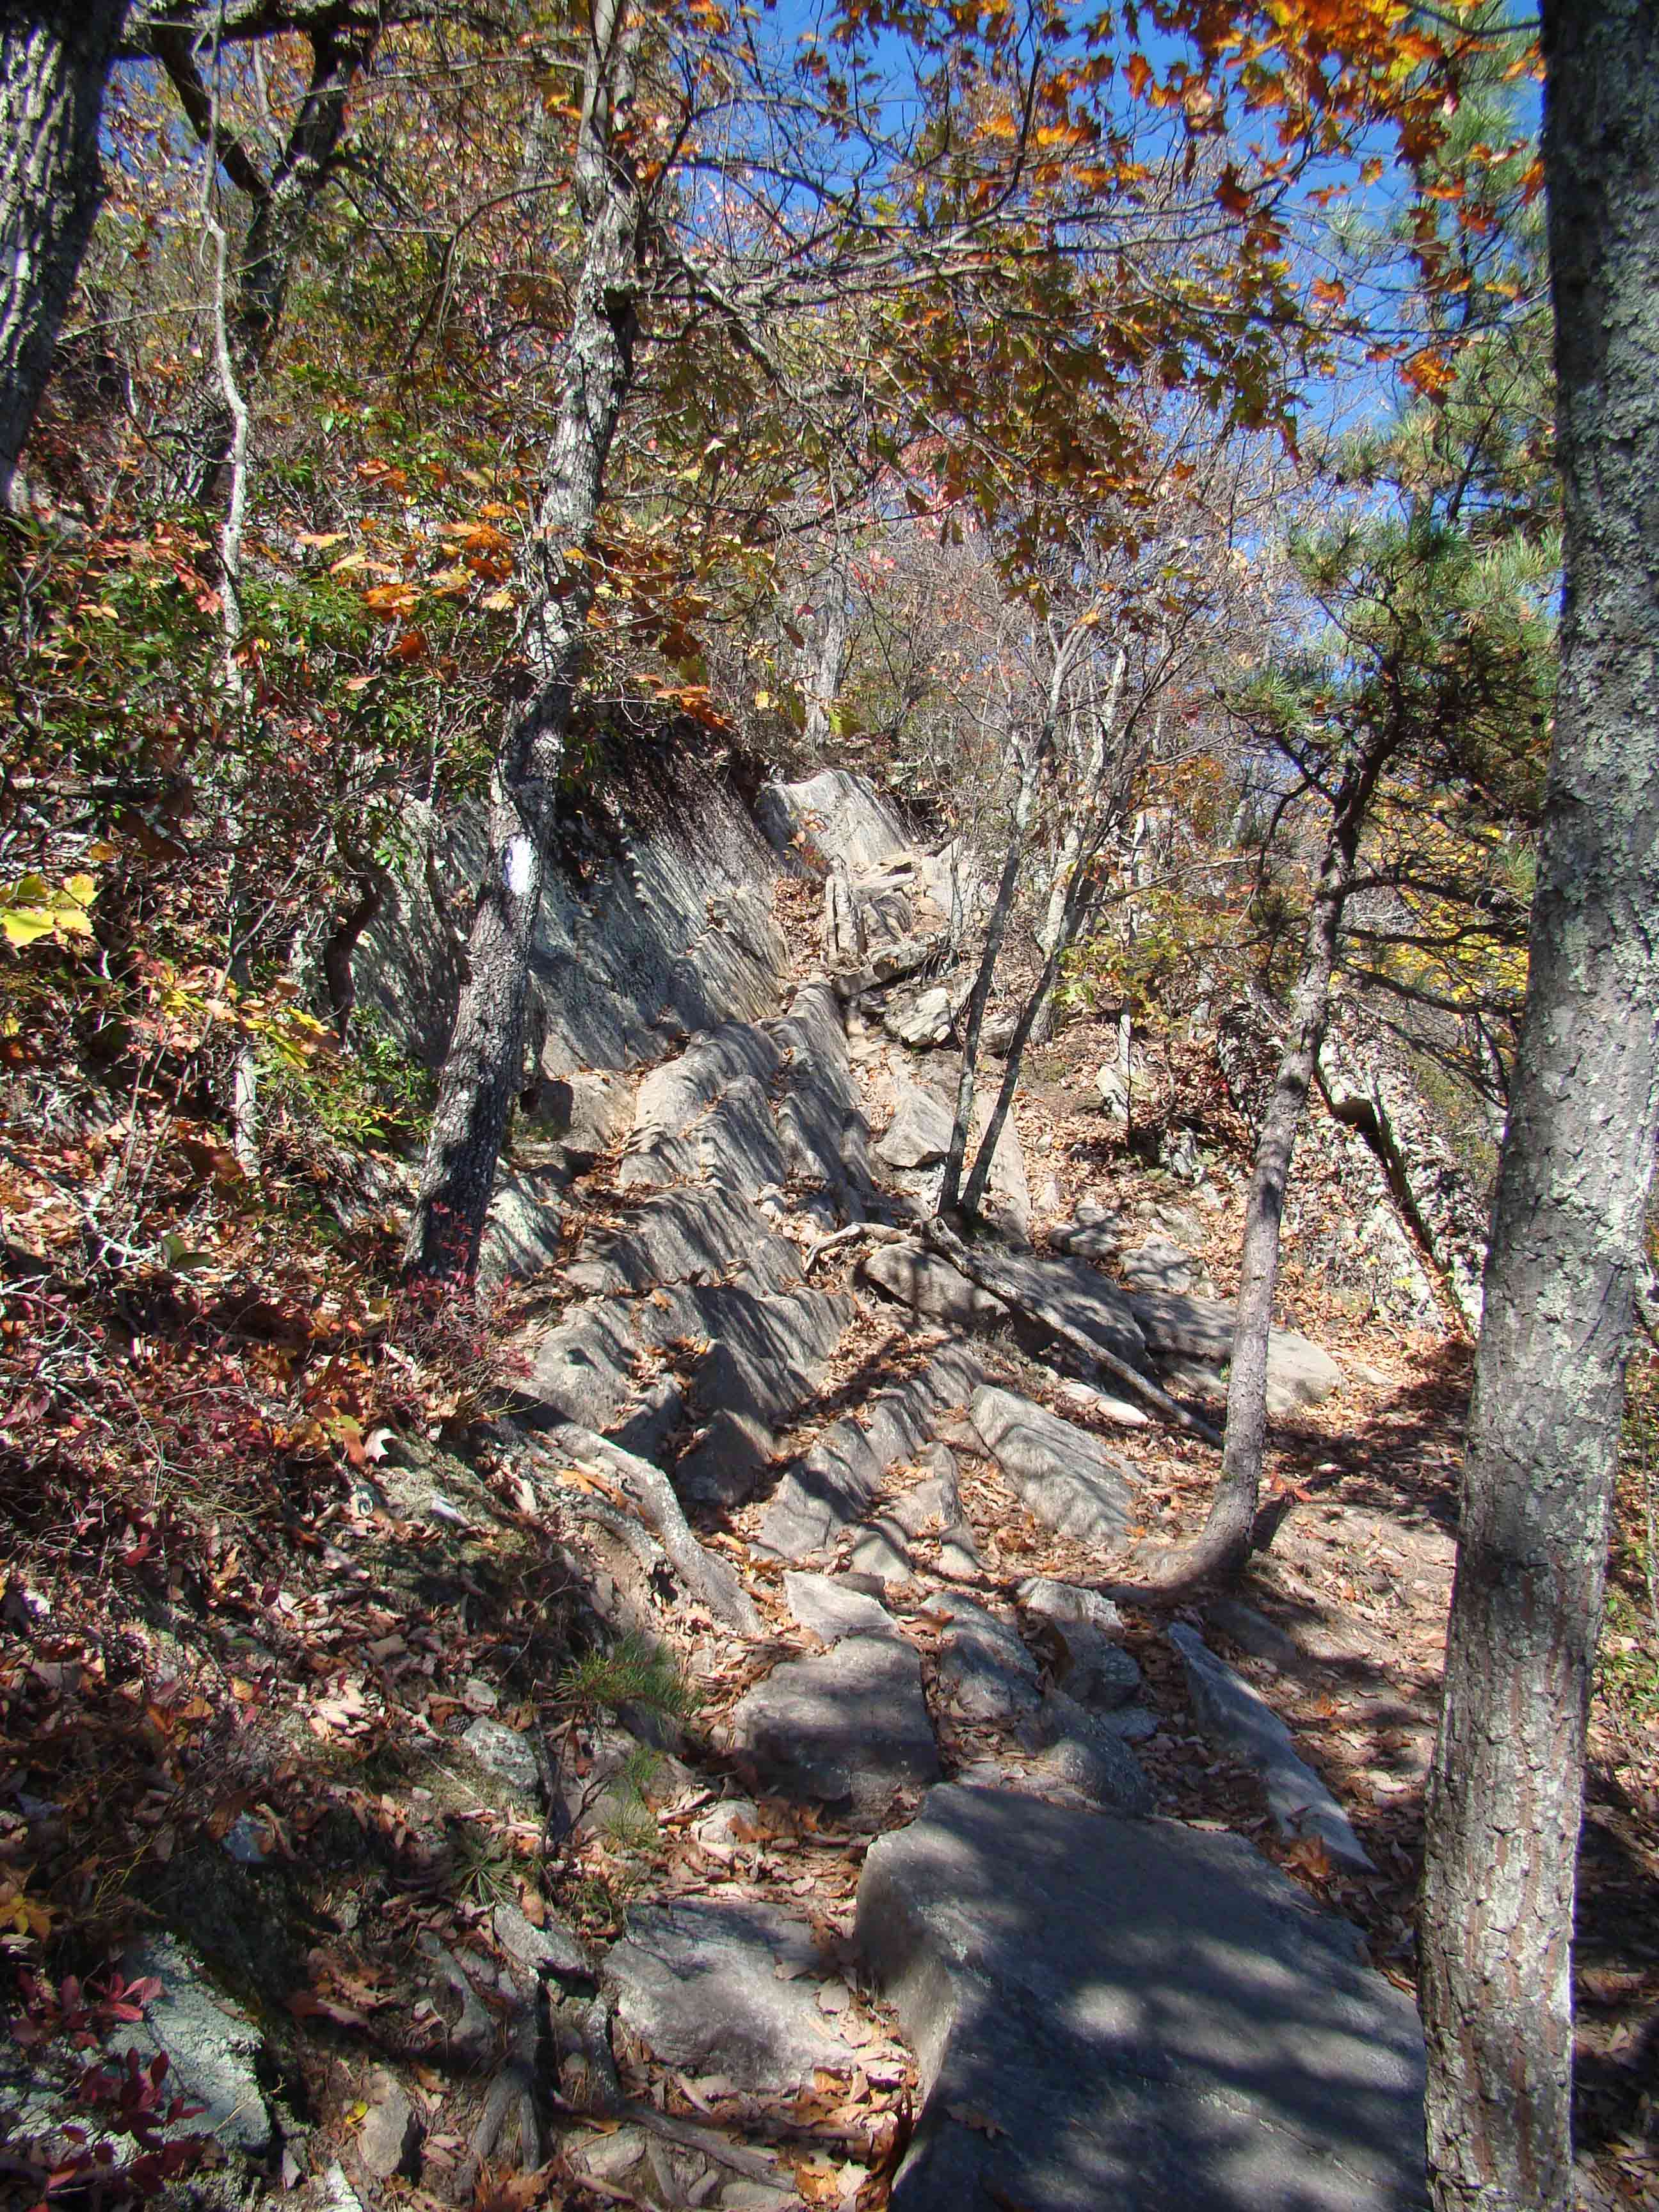 Rough trail at  mm 2.4 over sloping rocks  Courtesy
ideanna656@aol.com